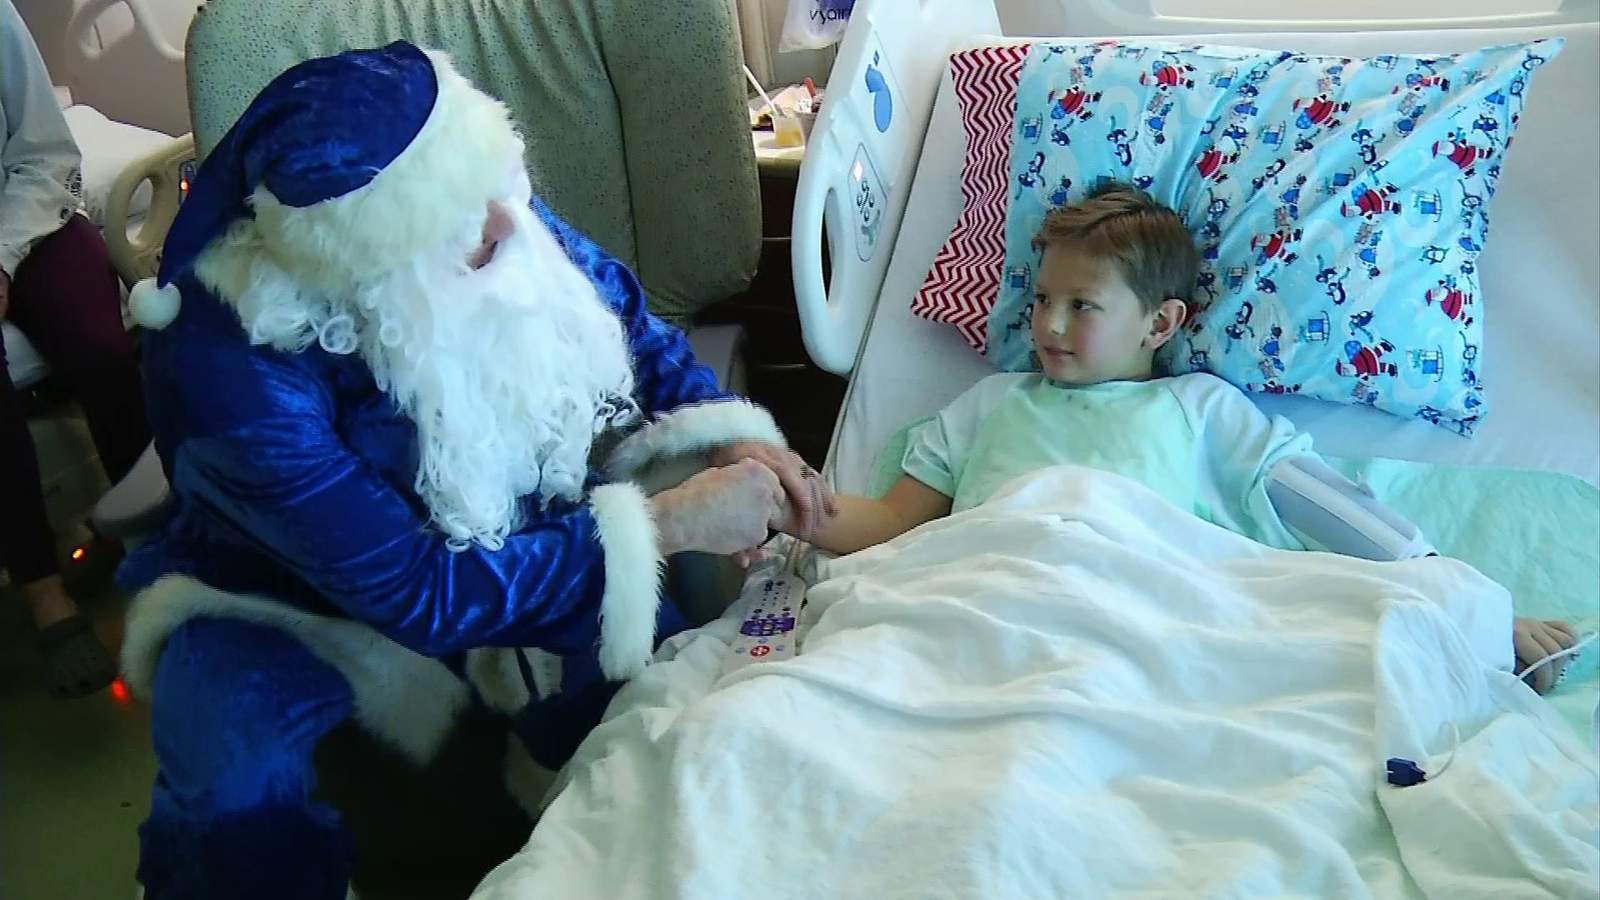 “Blue Santa” spends day after Christmas spreading cheer at Carilion Children’s Hospital